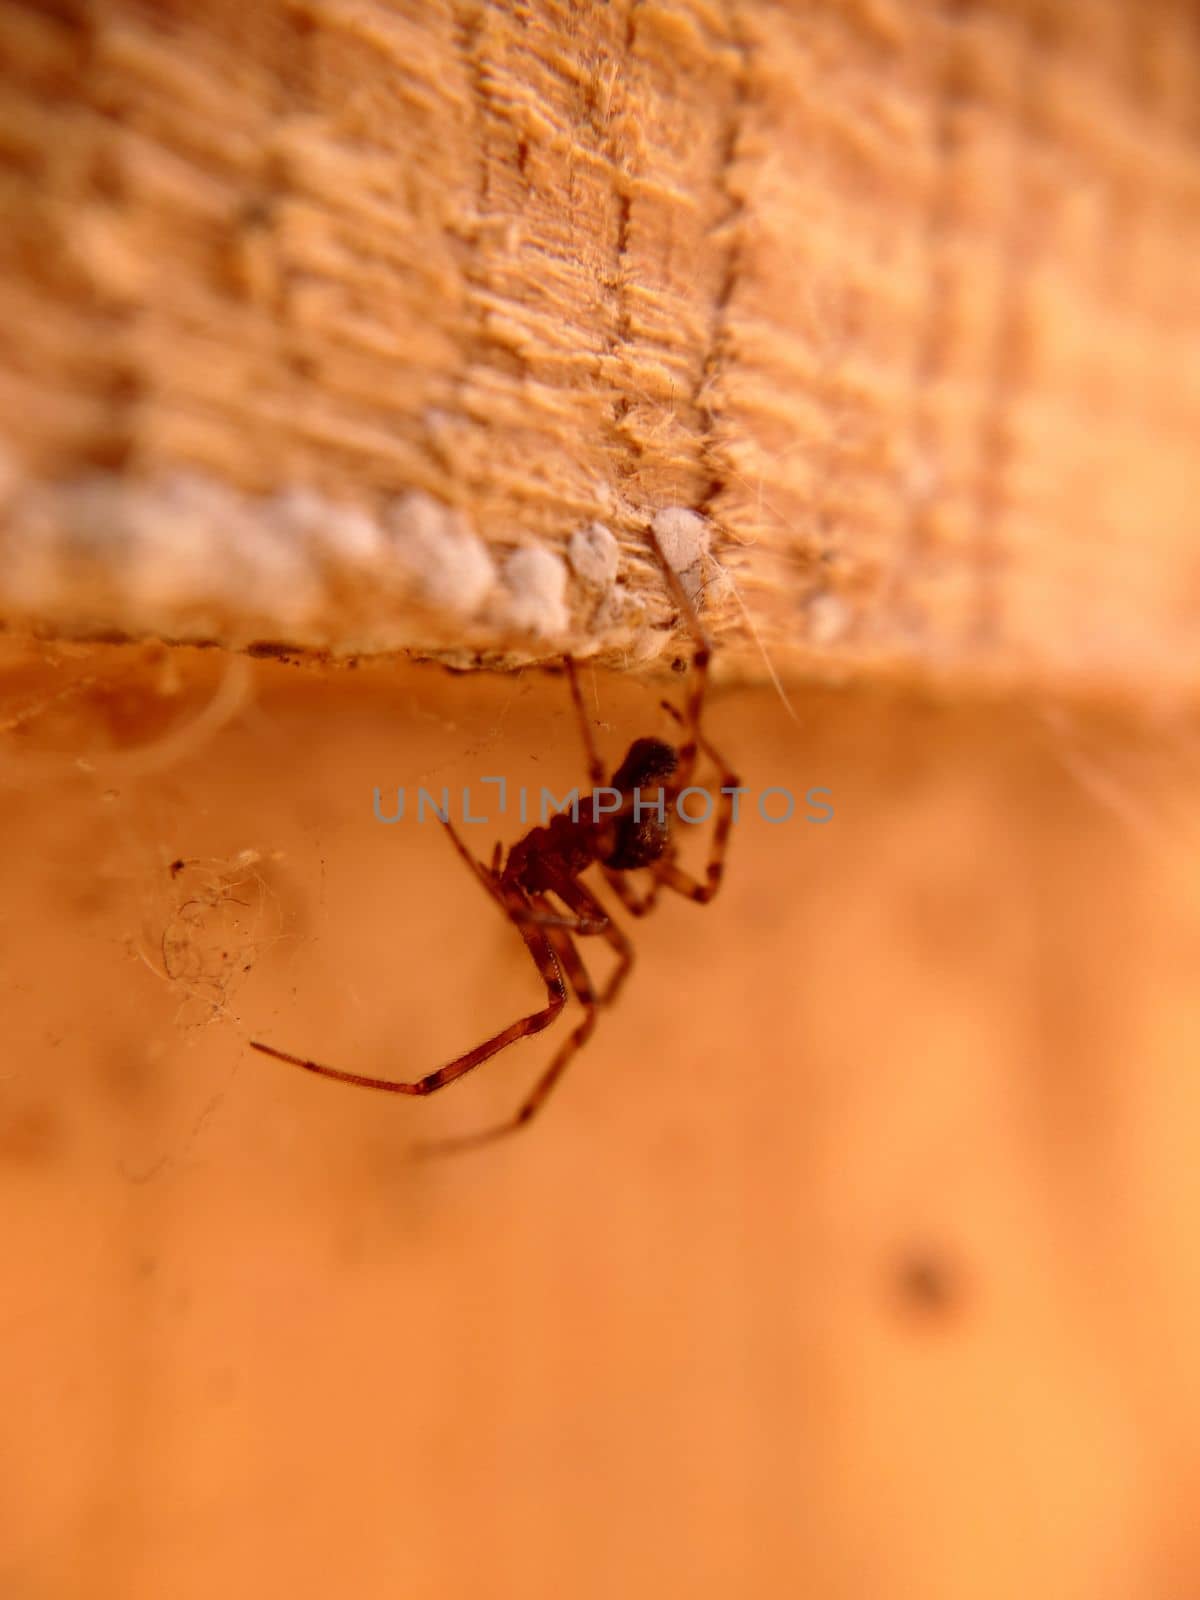 Spider close-up hanging under the wooden ceiling.Texture or background.Macrophotography.